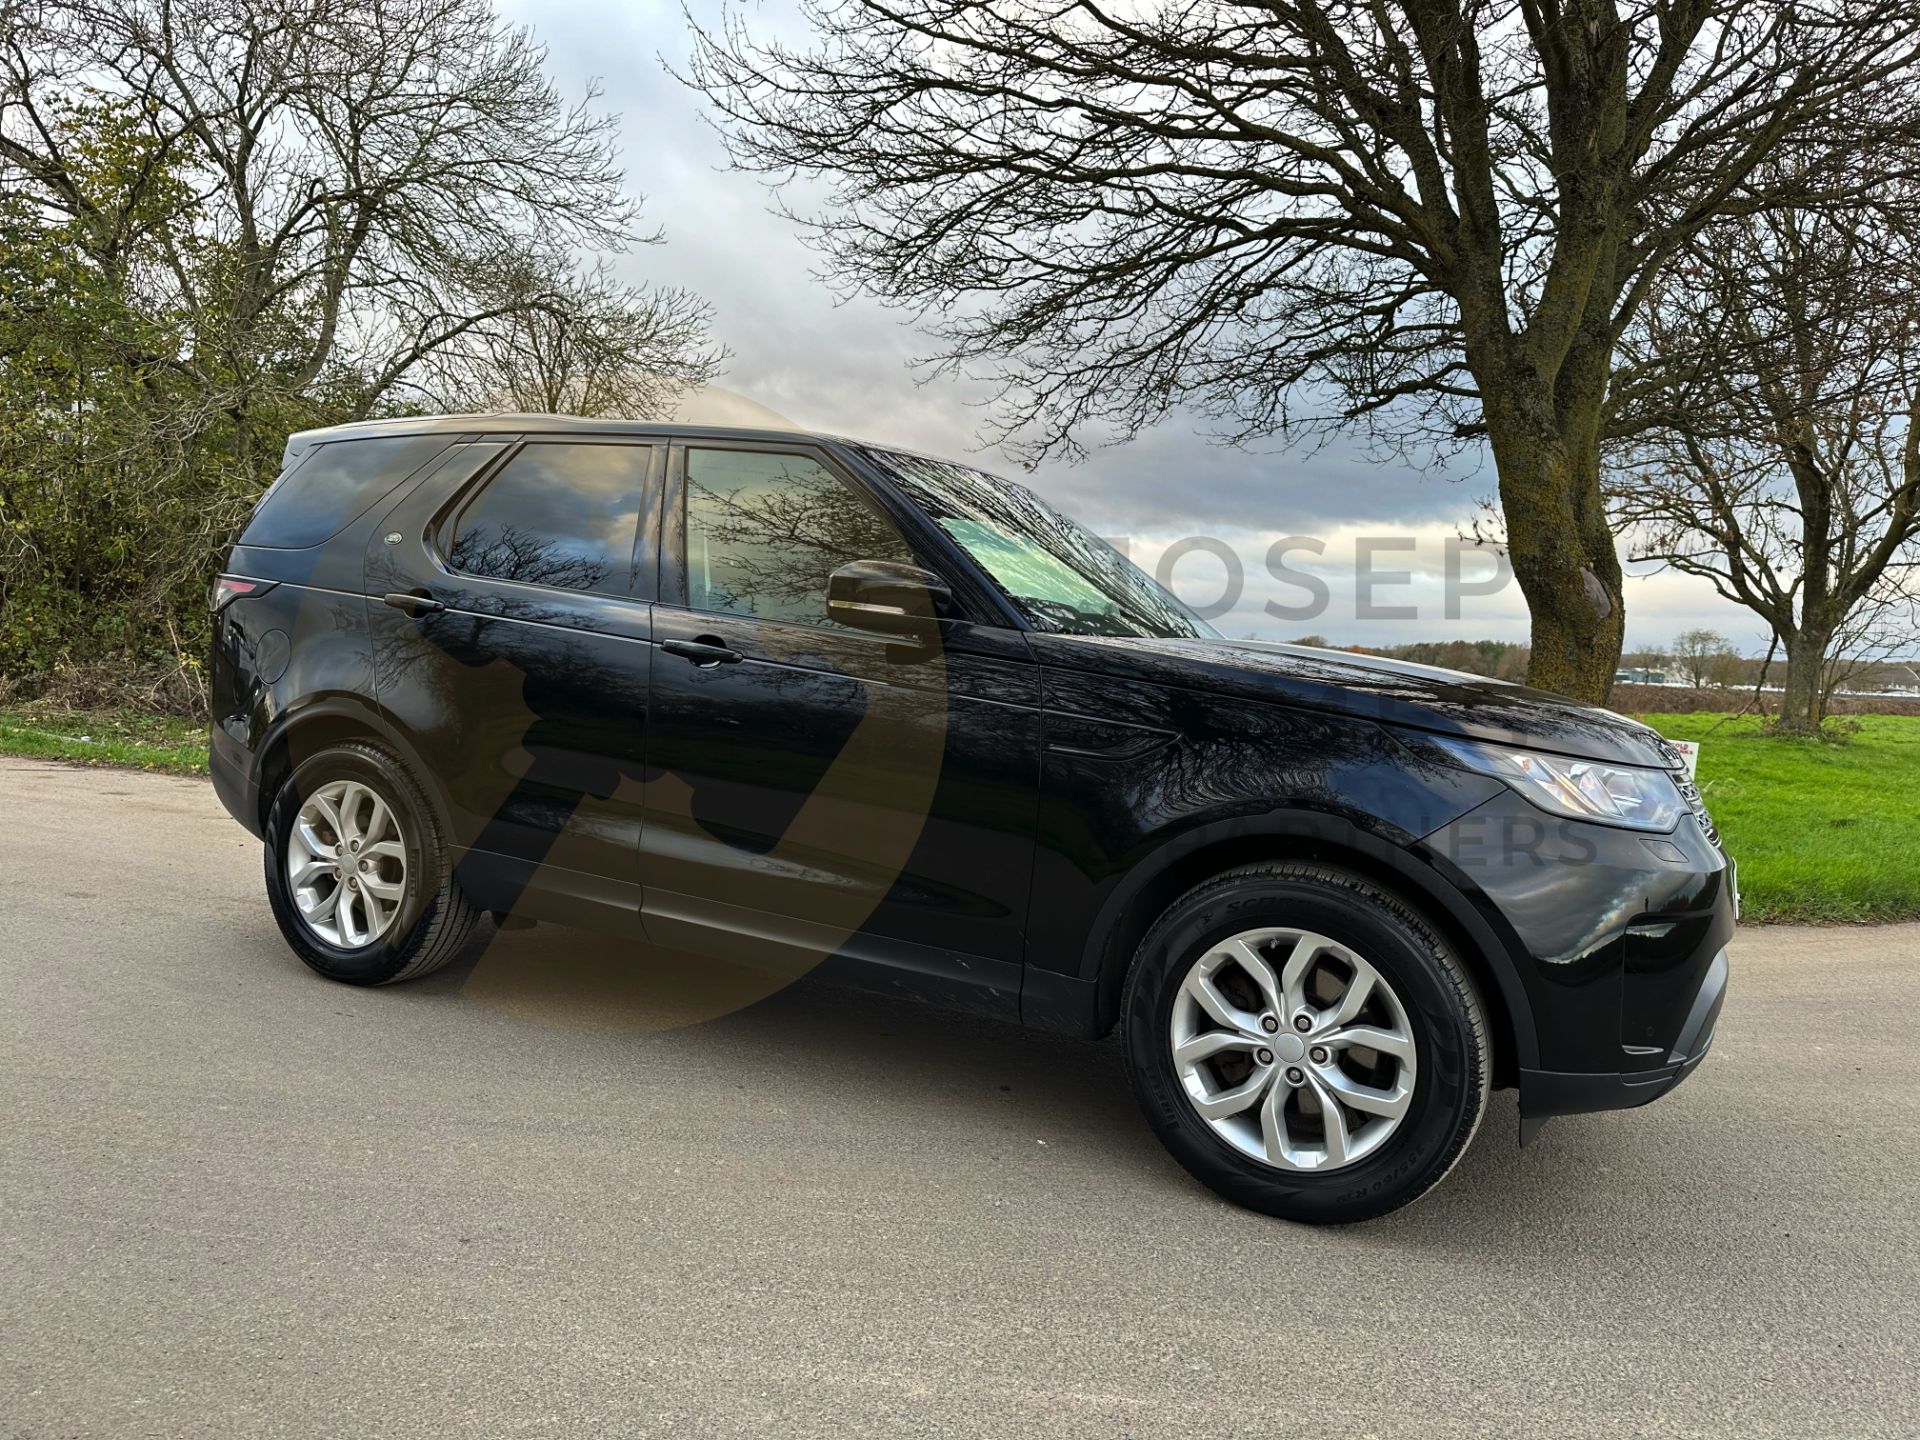 LAND ROVER DISCOVERY 5 *ALL NEW MODEL* (2021 - EURO 6) 8 SPEED AUTO (1 OWNER) *ONLY 19,000 MILES* - Image 2 of 50